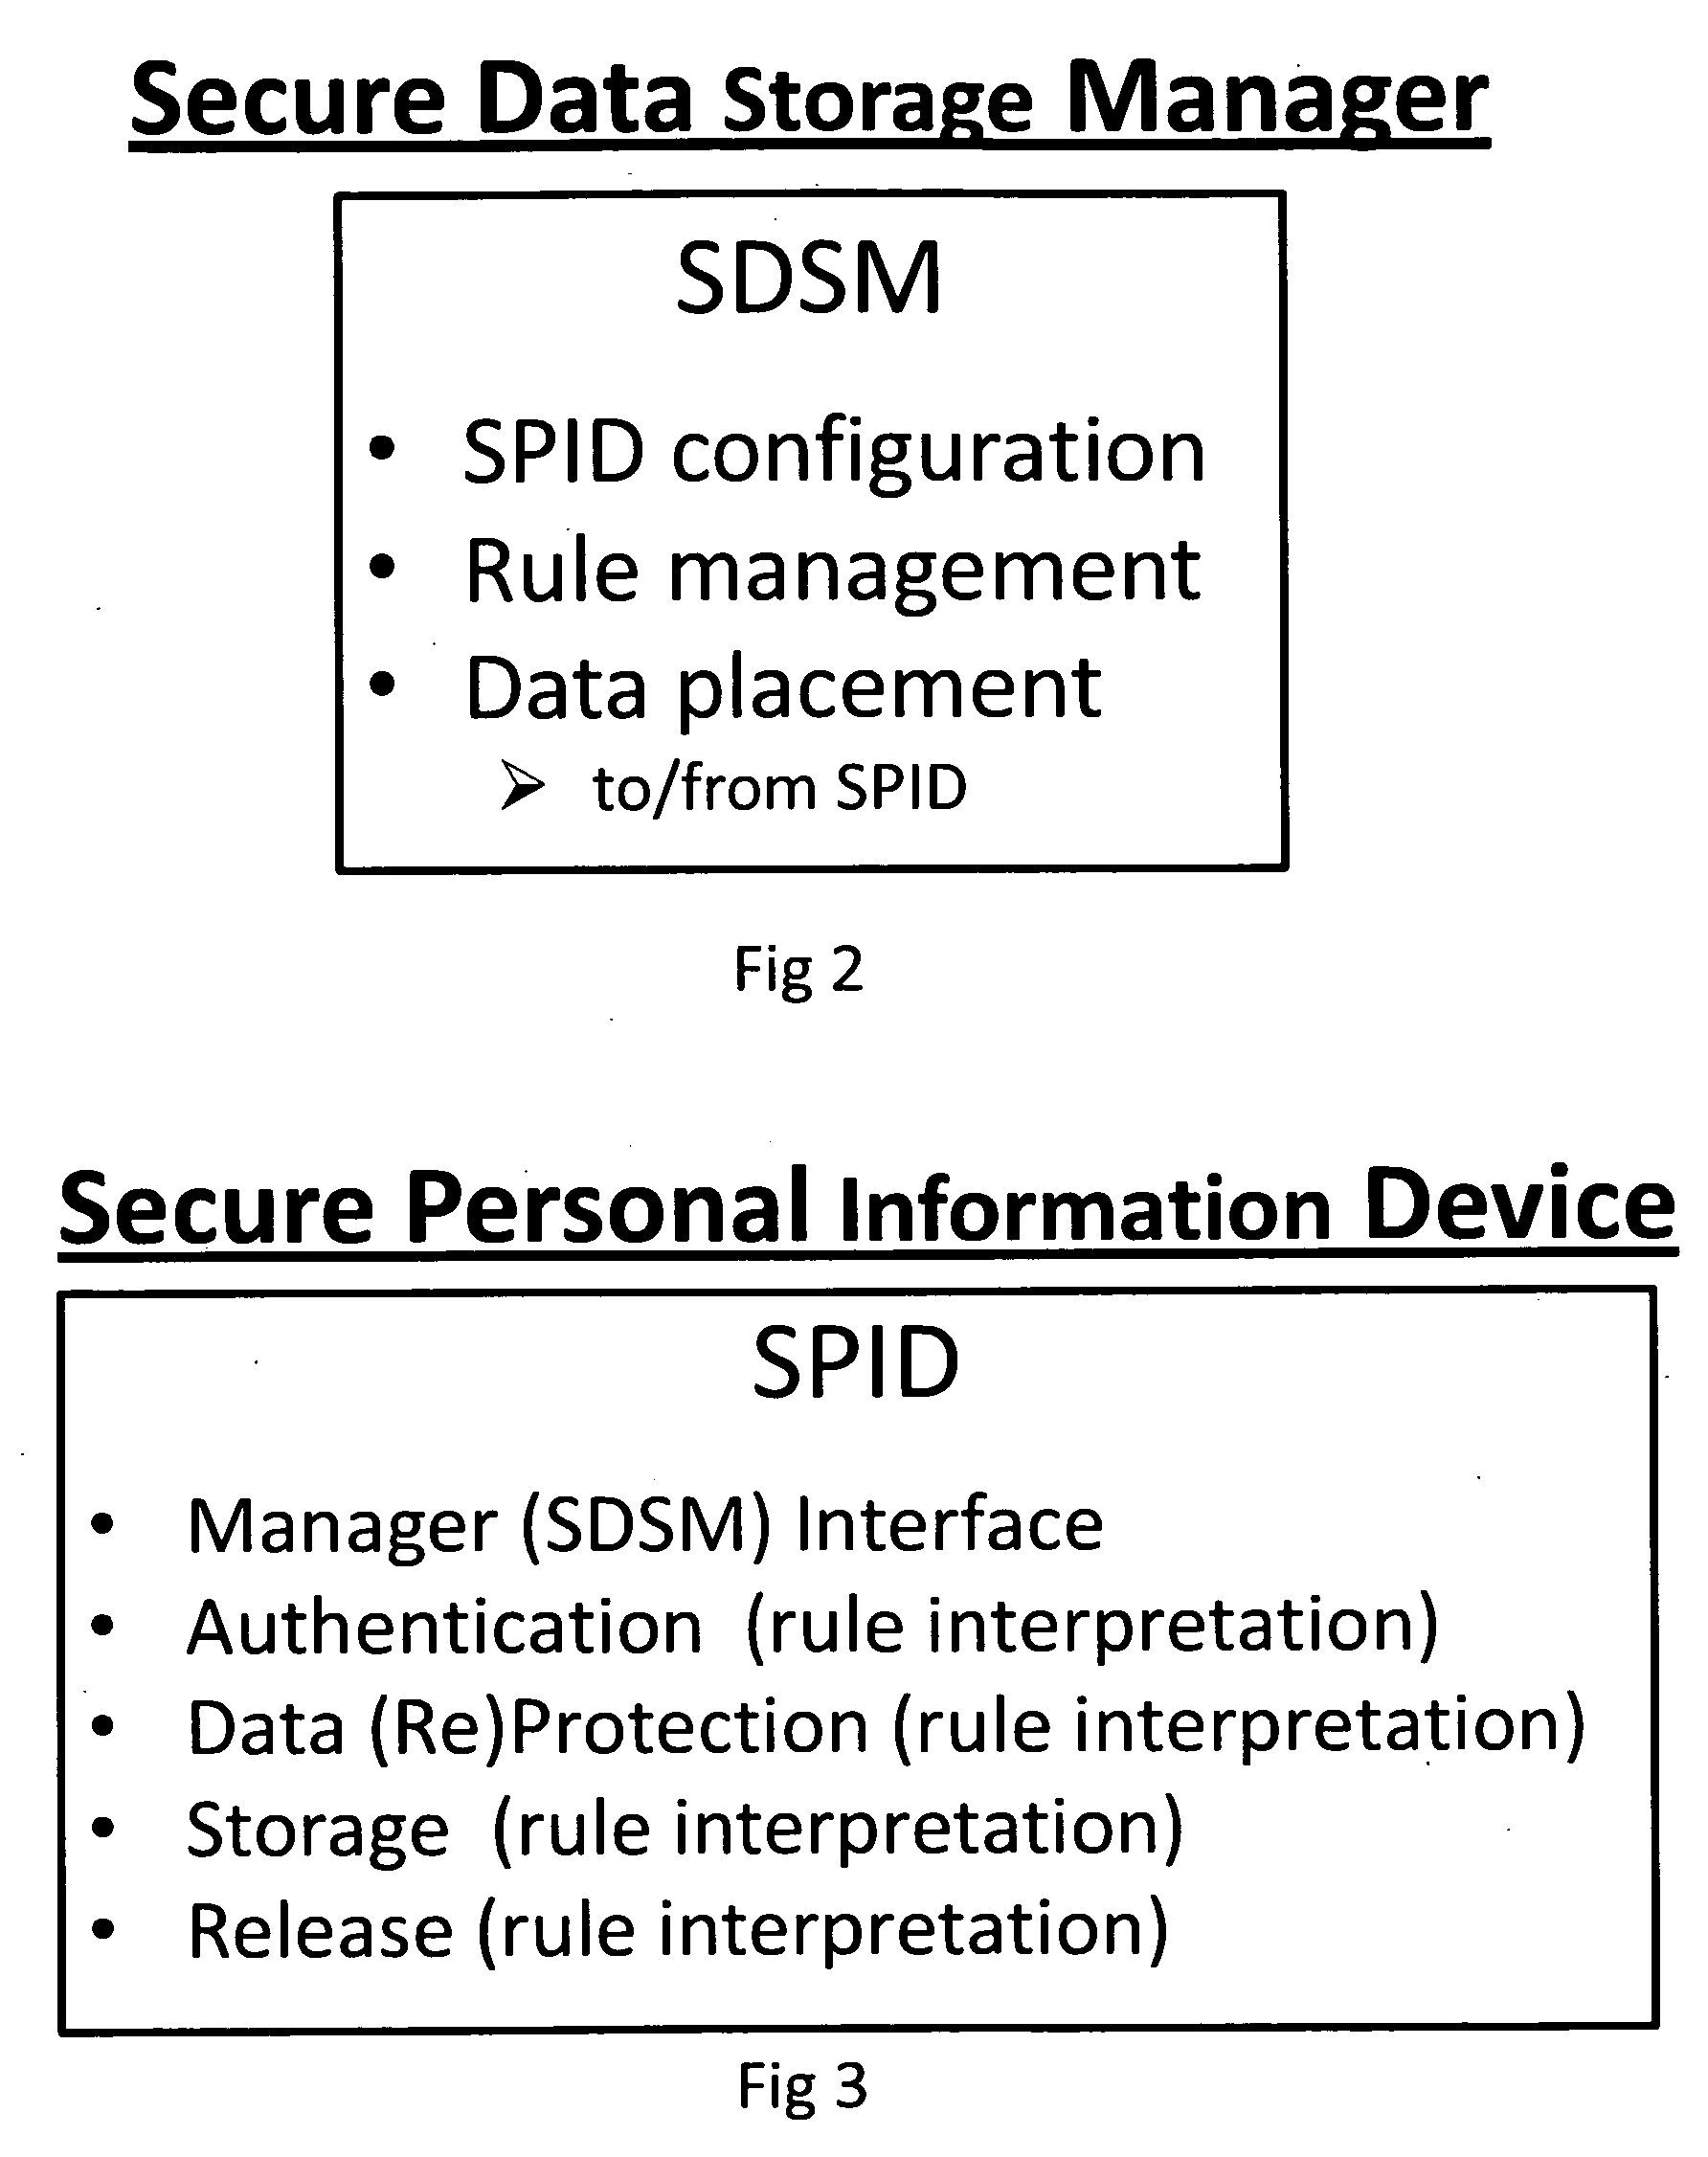 Security process for private data storage and sharing